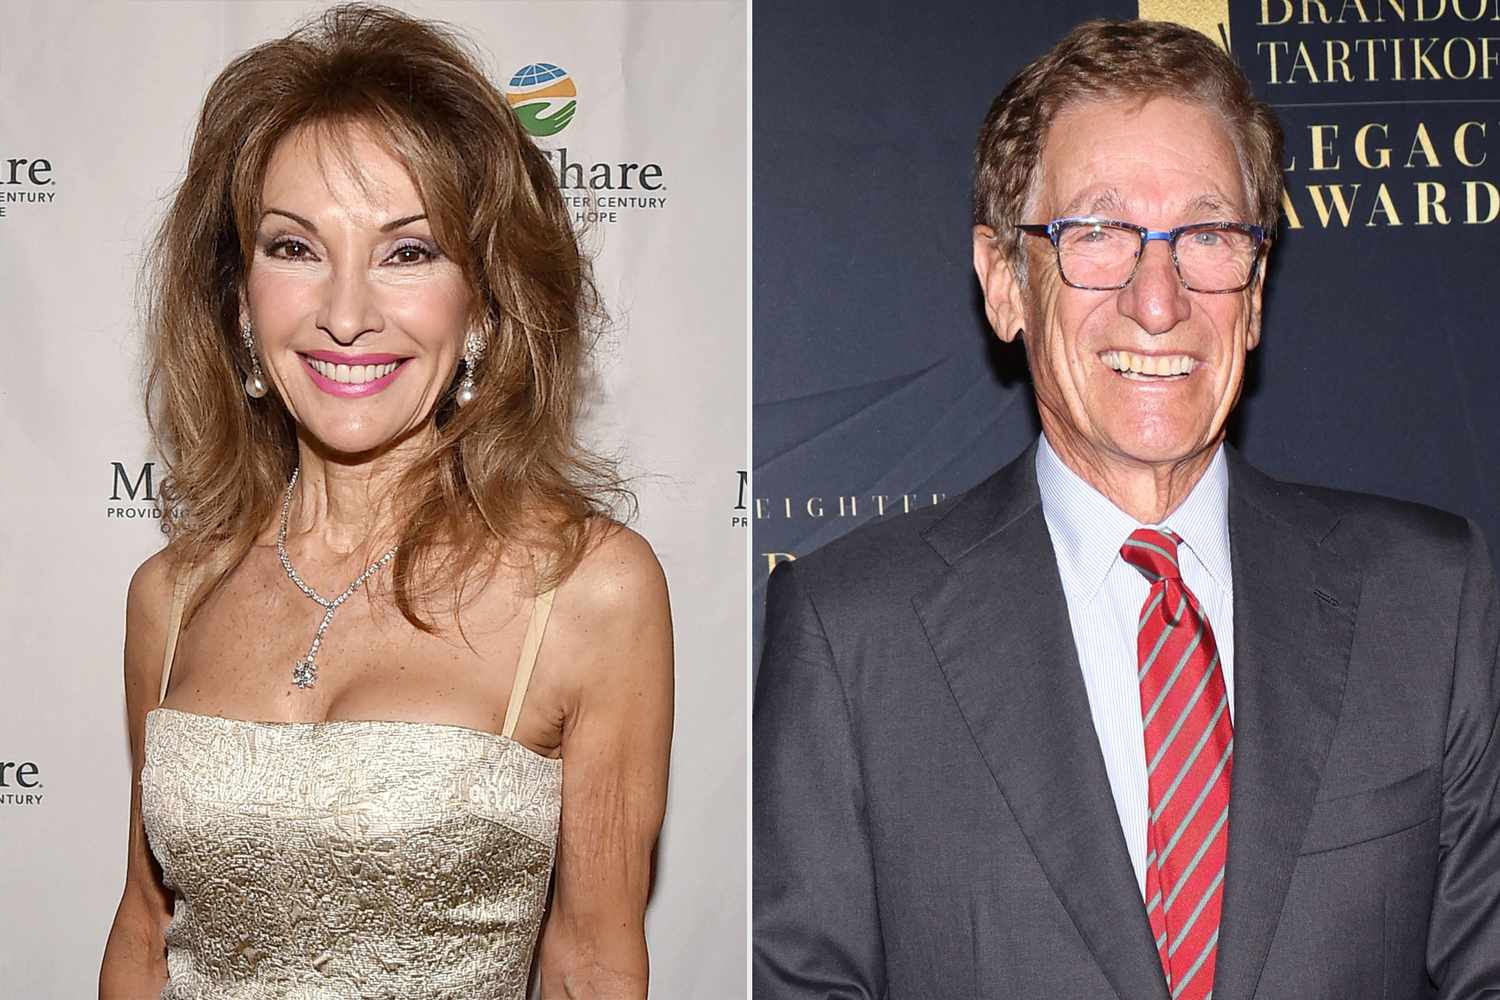 Susan Lucci, Maury Povich to receive Lifetime Achievement Honors